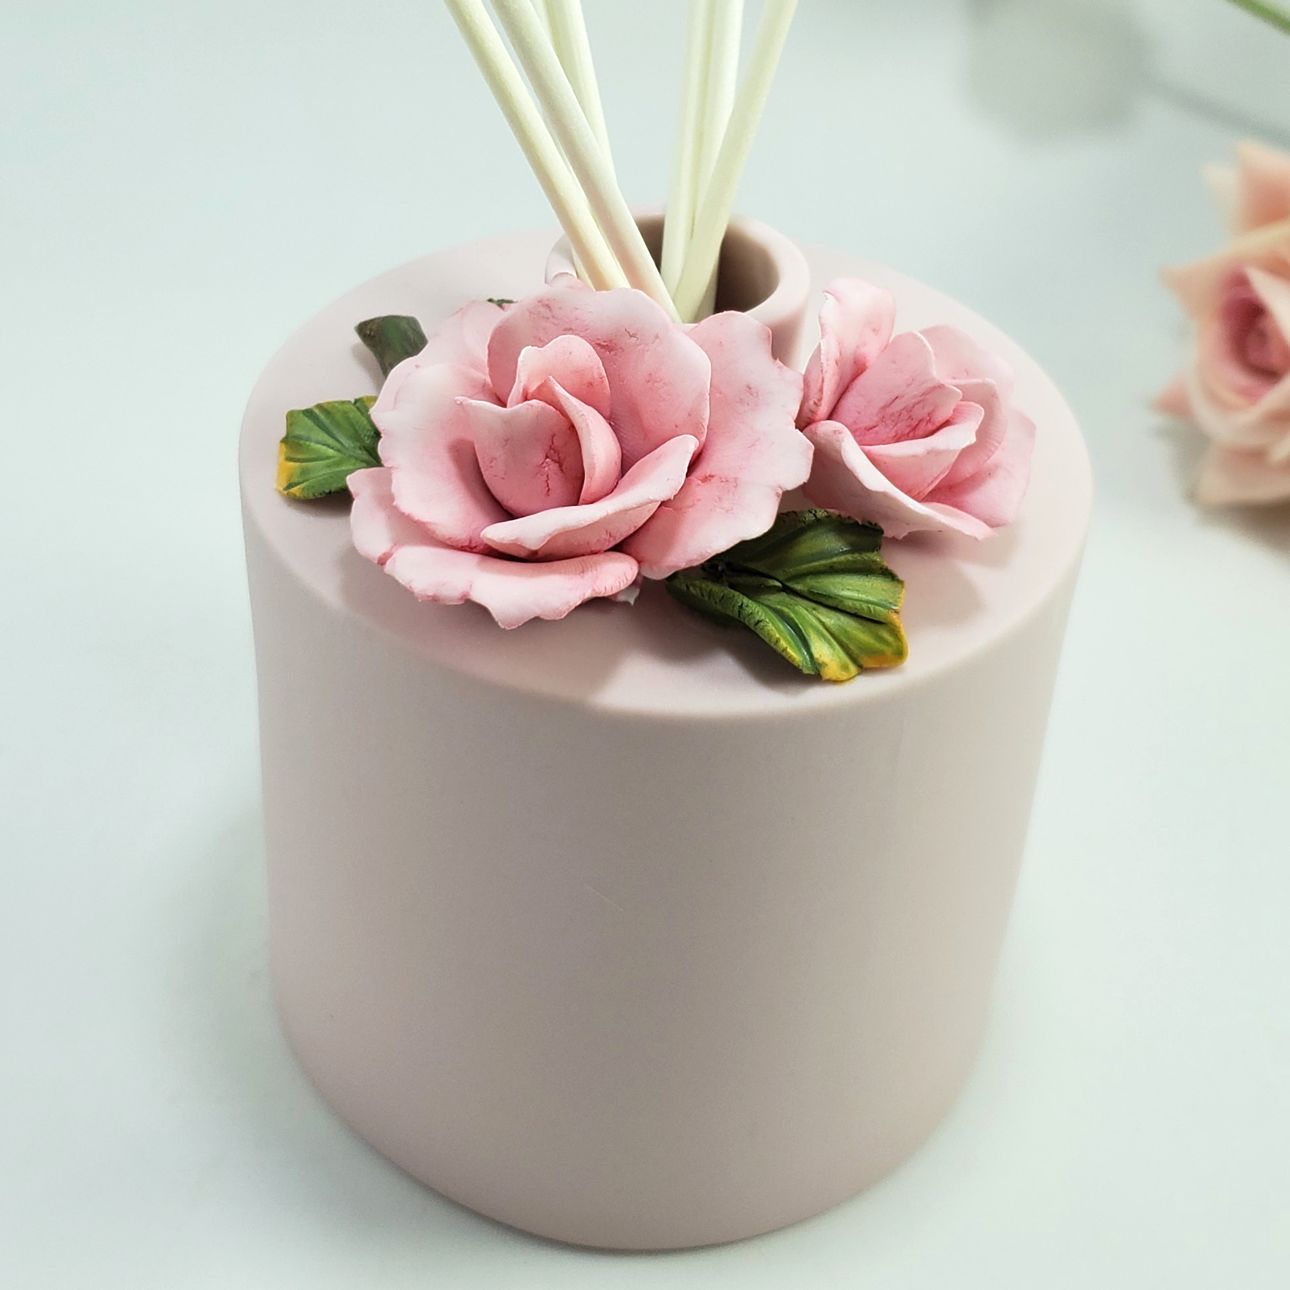 Brand New Cactus Ceramic Aroma Diffuser with High Quality